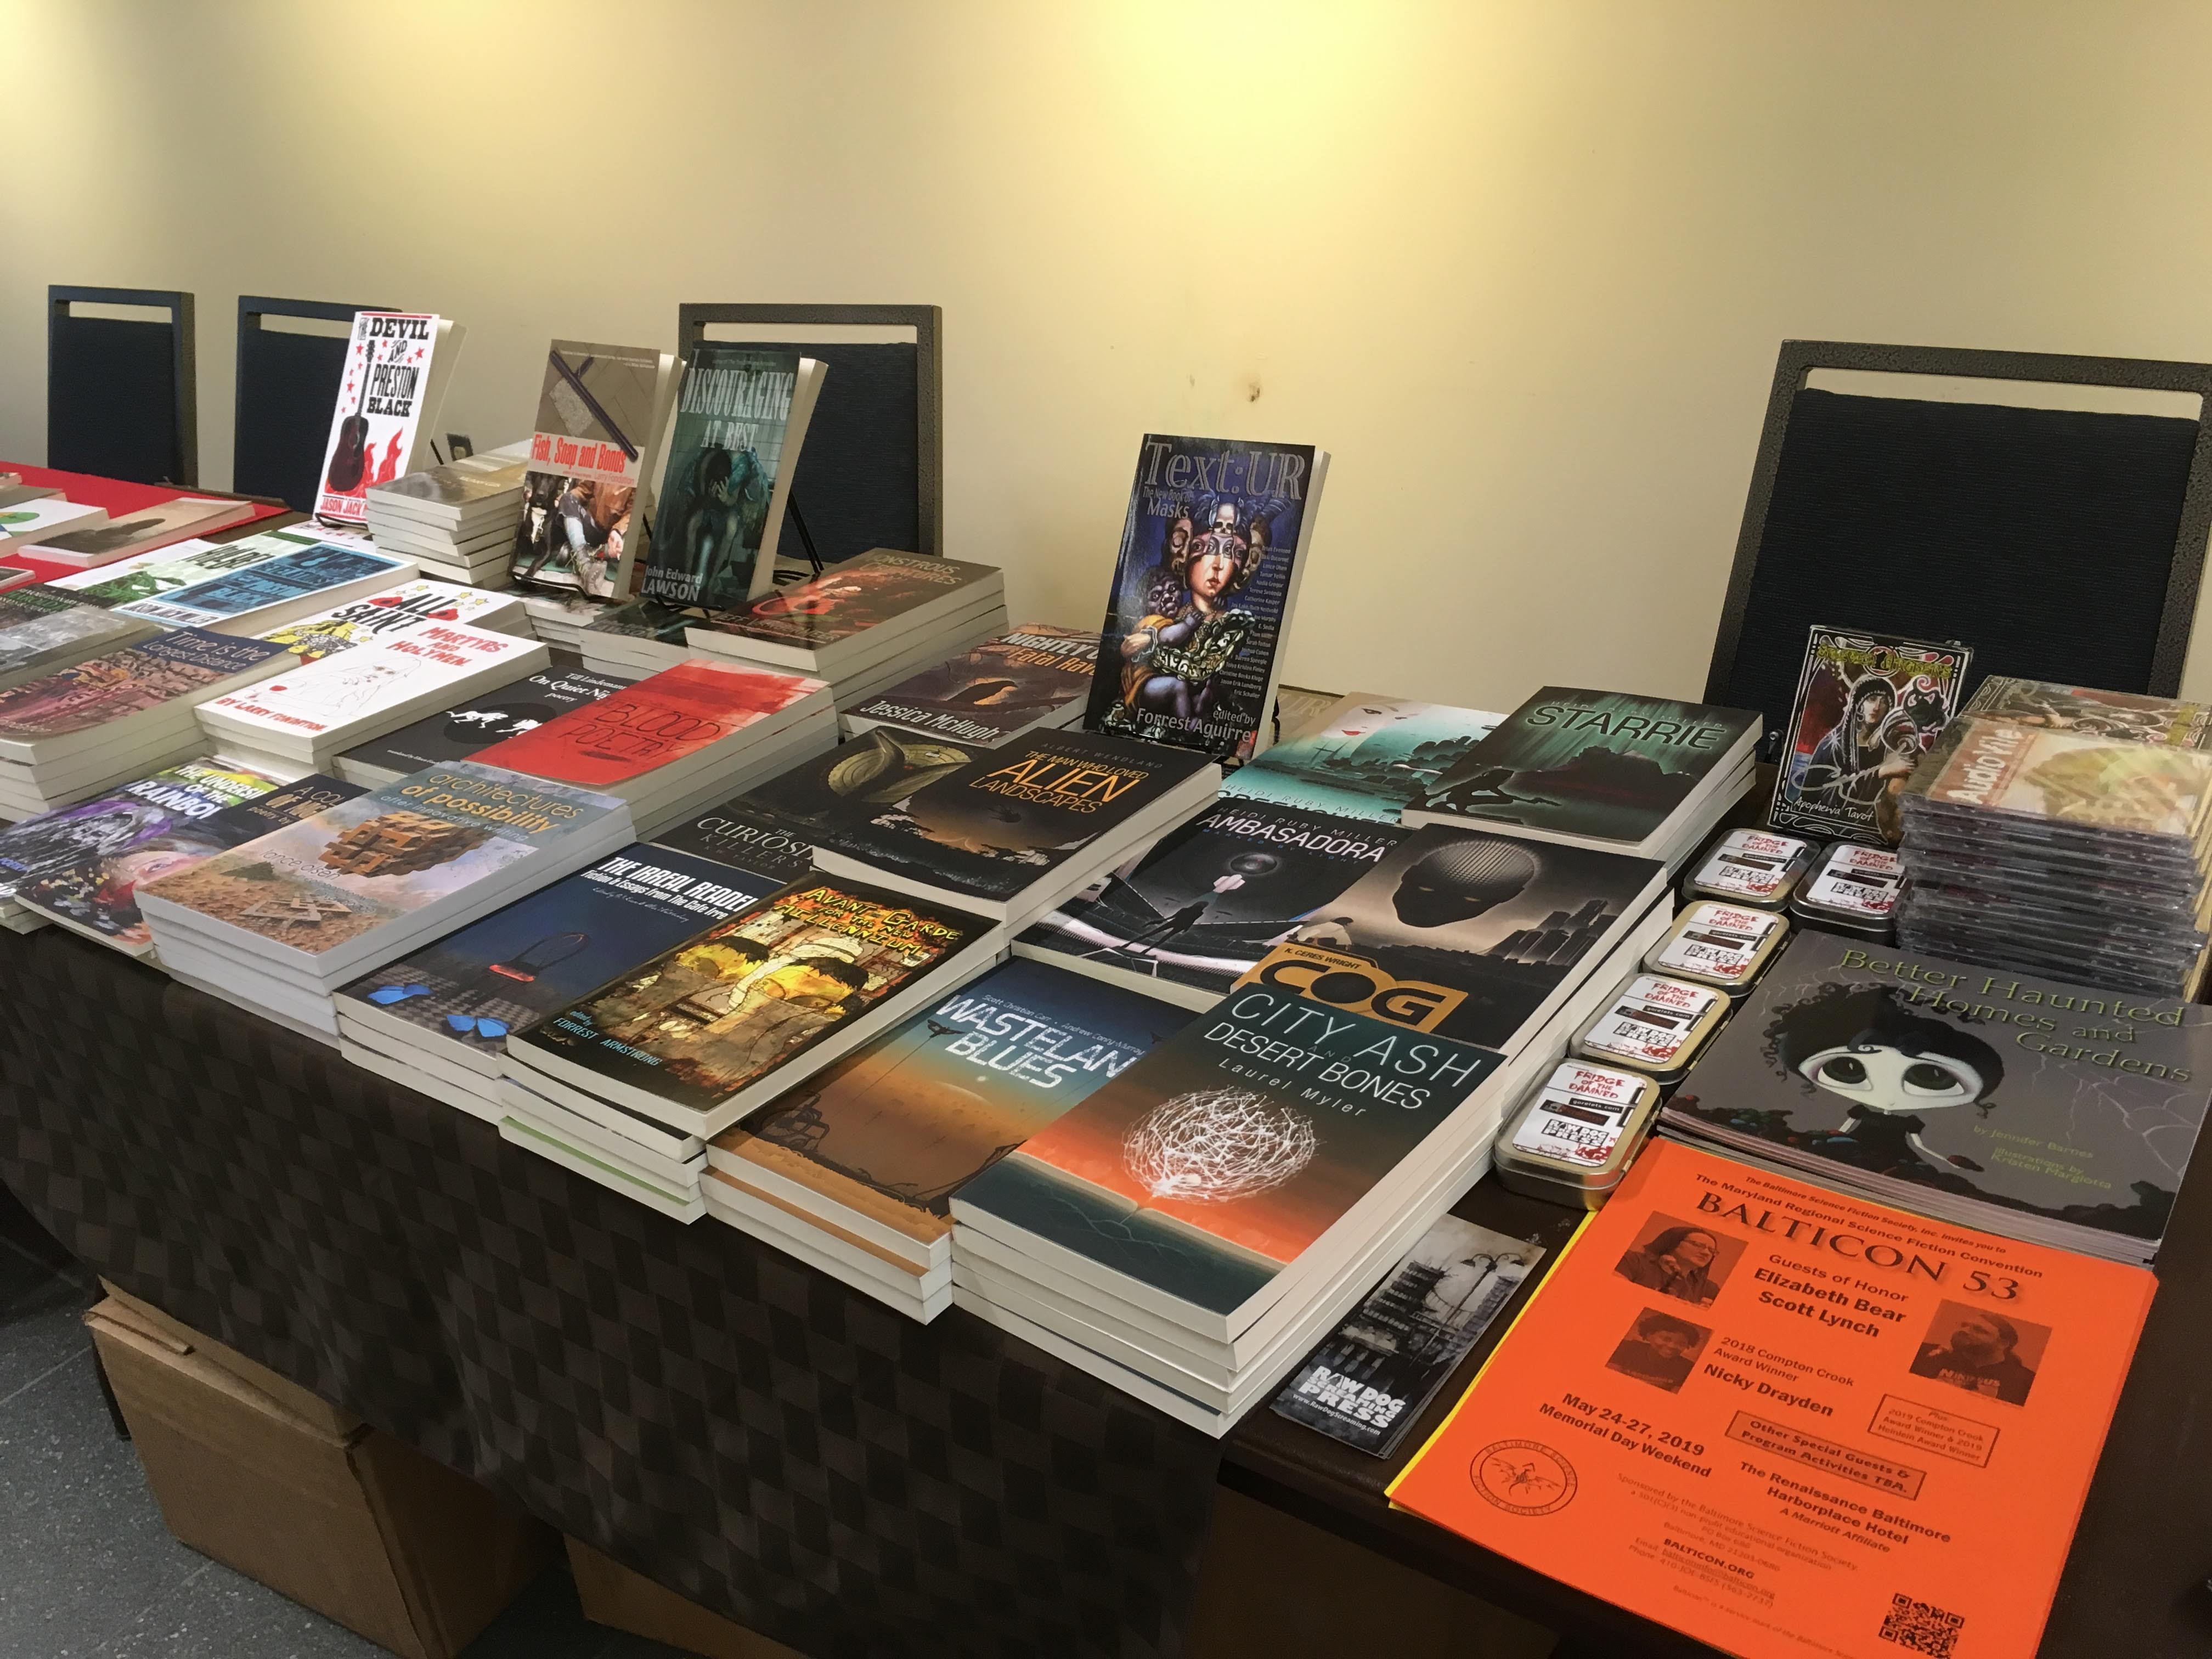 Another display featuring RDSP books